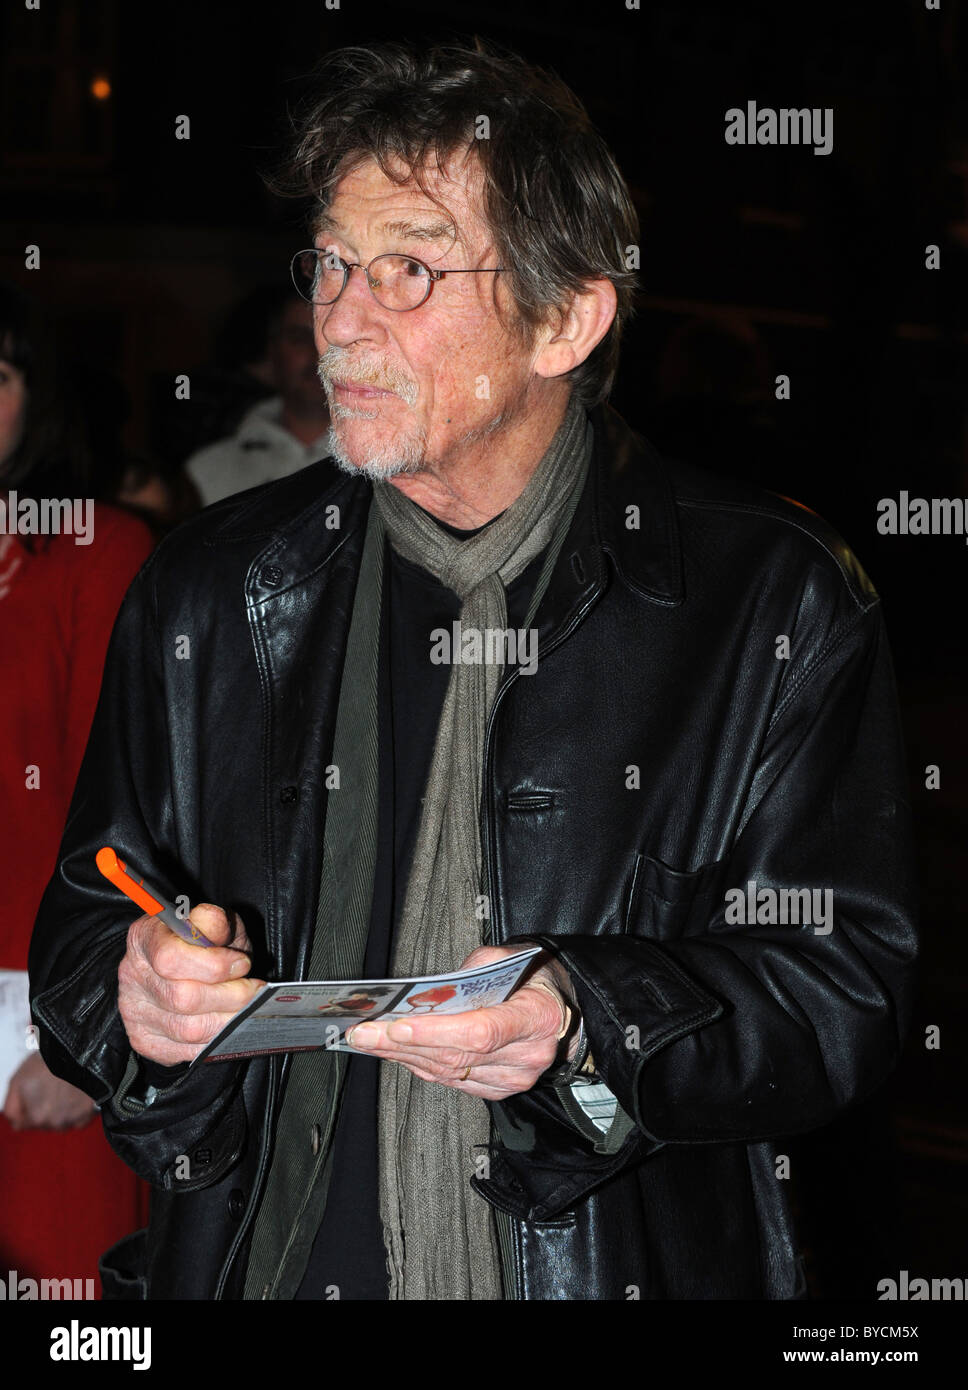 Special premier of the new film Brighton Rock at Brighton's Duke of York's cinema - One of the stars John Hurt signs autographs Stock Photo